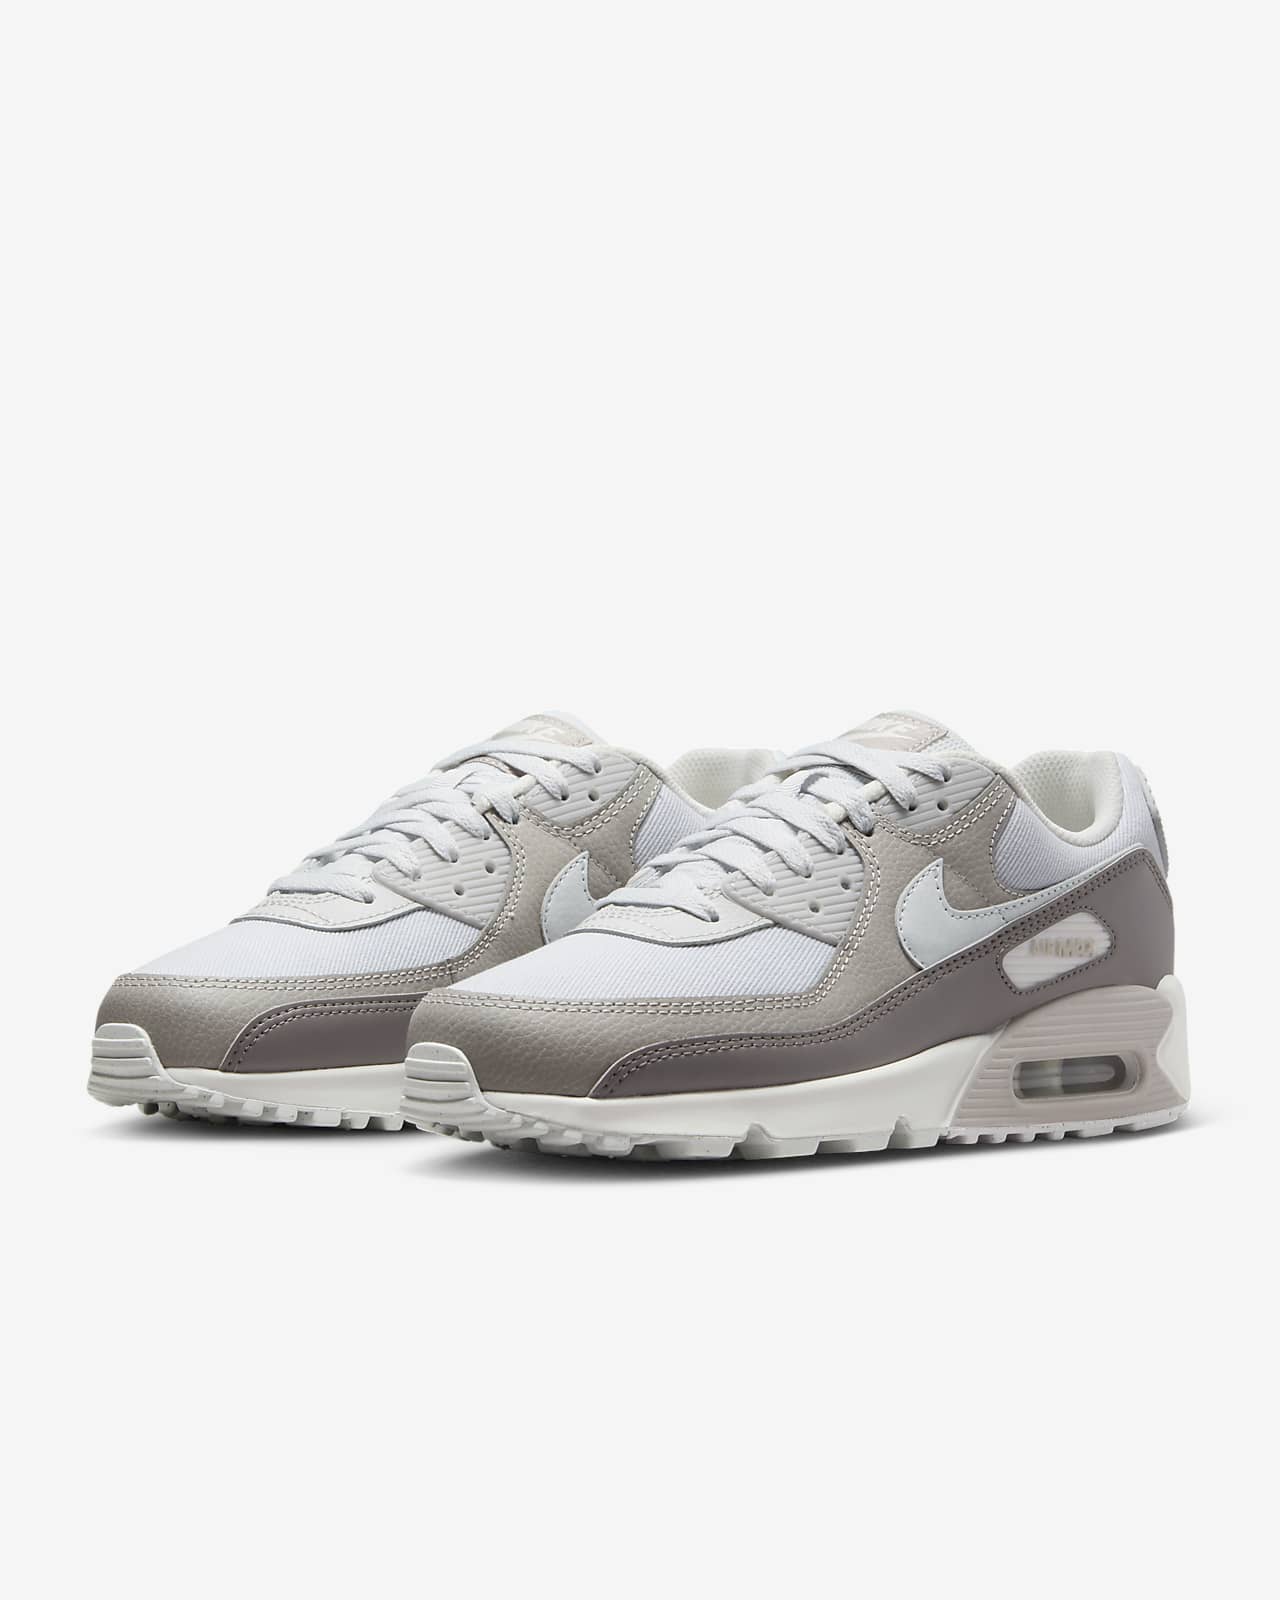 Men's Trainers & Shoes. Nike HR